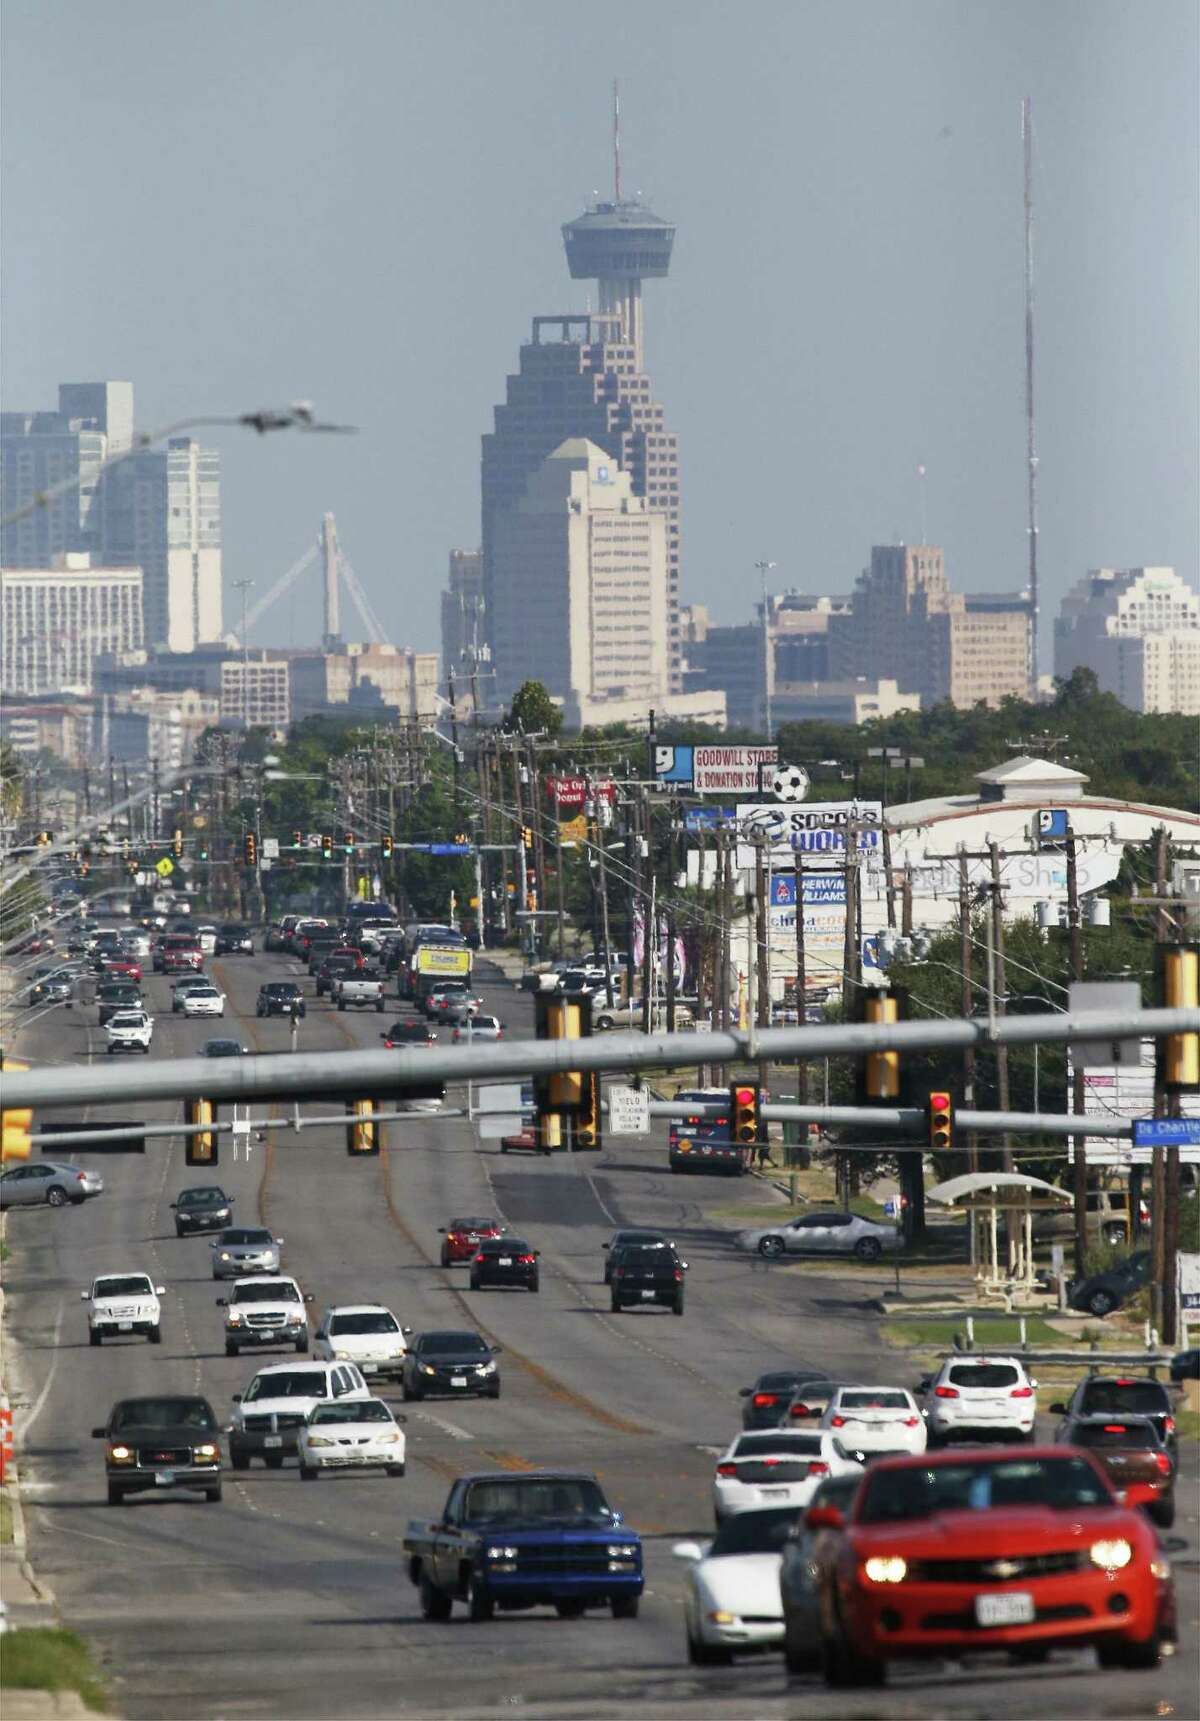 A view of downtown from Fredericksburg Road on Friday, Aug. 12, 2016. The ozone levels in San Antonio's statistics causes 52 premature deaths per year according to a new public health study by New York University and the American Thoracic Society. (Kin Man Hui/San Antonio Express-News)